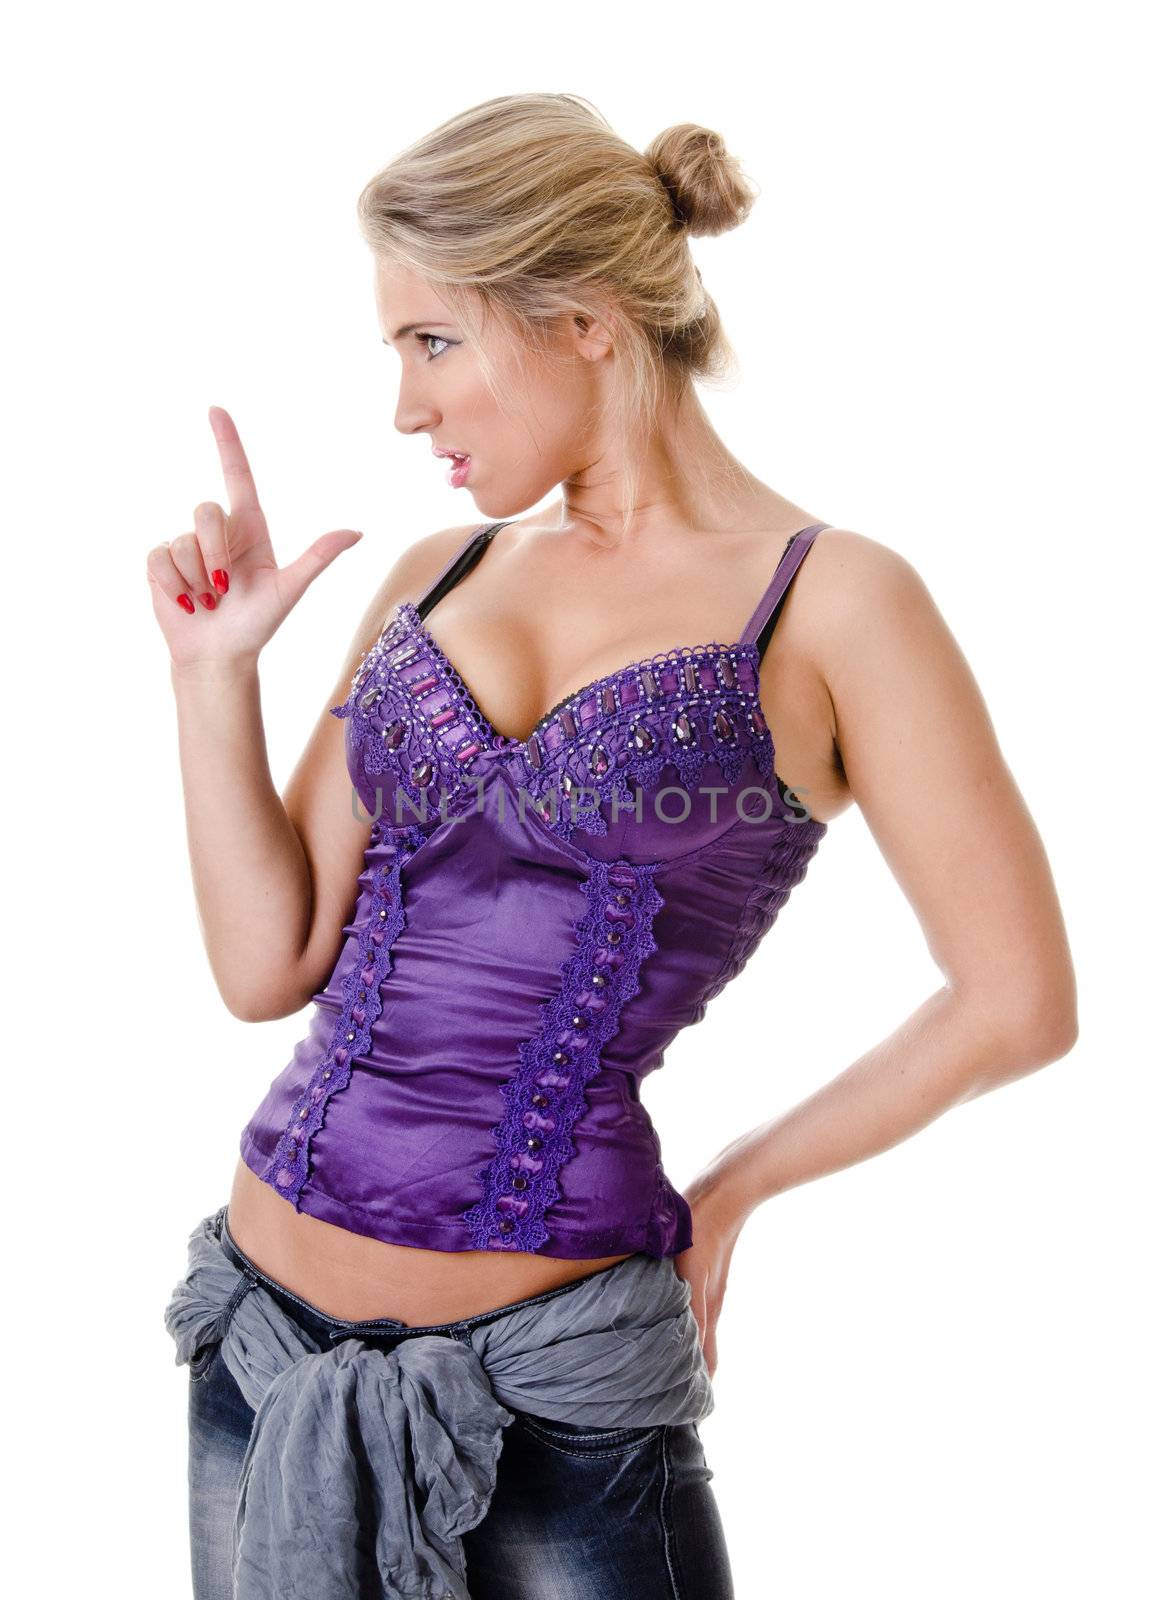 provocative portrait of a young woman in jeans and corset